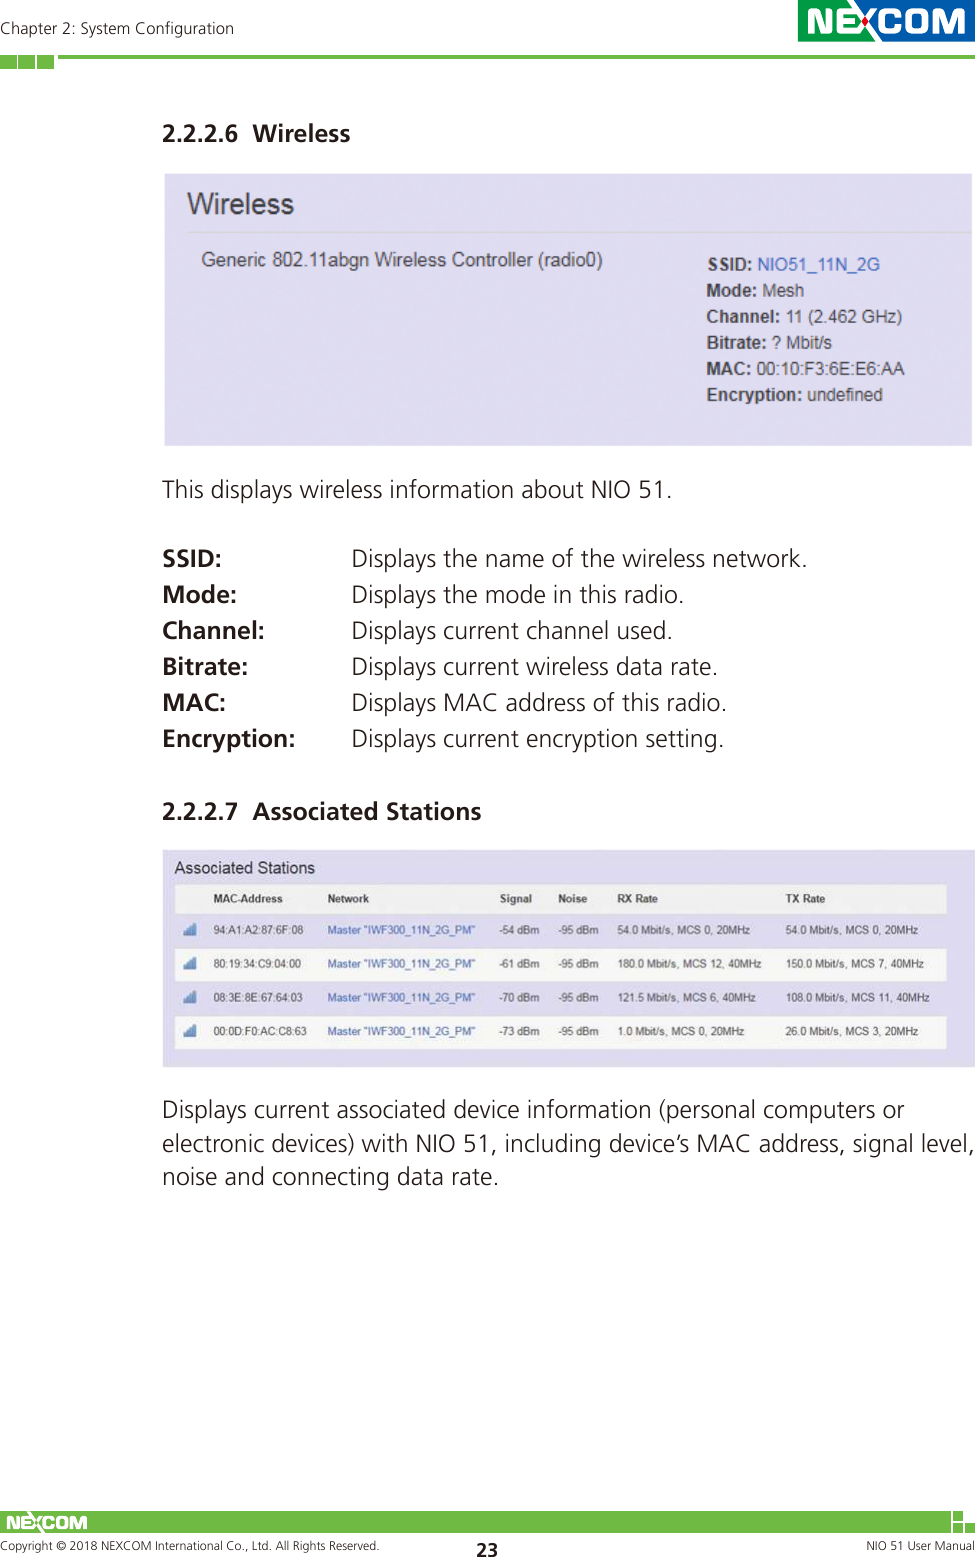 Copyright © 2018 NEXCOM International Co., Ltd. All Rights Reserved. NIO 51 User Manual 23Chapter 2: System Configuration2.2.2.6  WirelessThis displays wireless information about NIO 51.SSID: Displays the name of the wireless network.Mode: Displays the mode in this radio.Channel: Displays current channel used.Bitrate: Displays current wireless data rate.MAC: Displays MAC address of this radio.Encryption: Displays current encryption setting.2.2.2.7  Associated StationsDisplays current associated device information (personal computers or electronic devices) with NIO 51, including device’s MAC address, signal level, noise and connecting data rate.